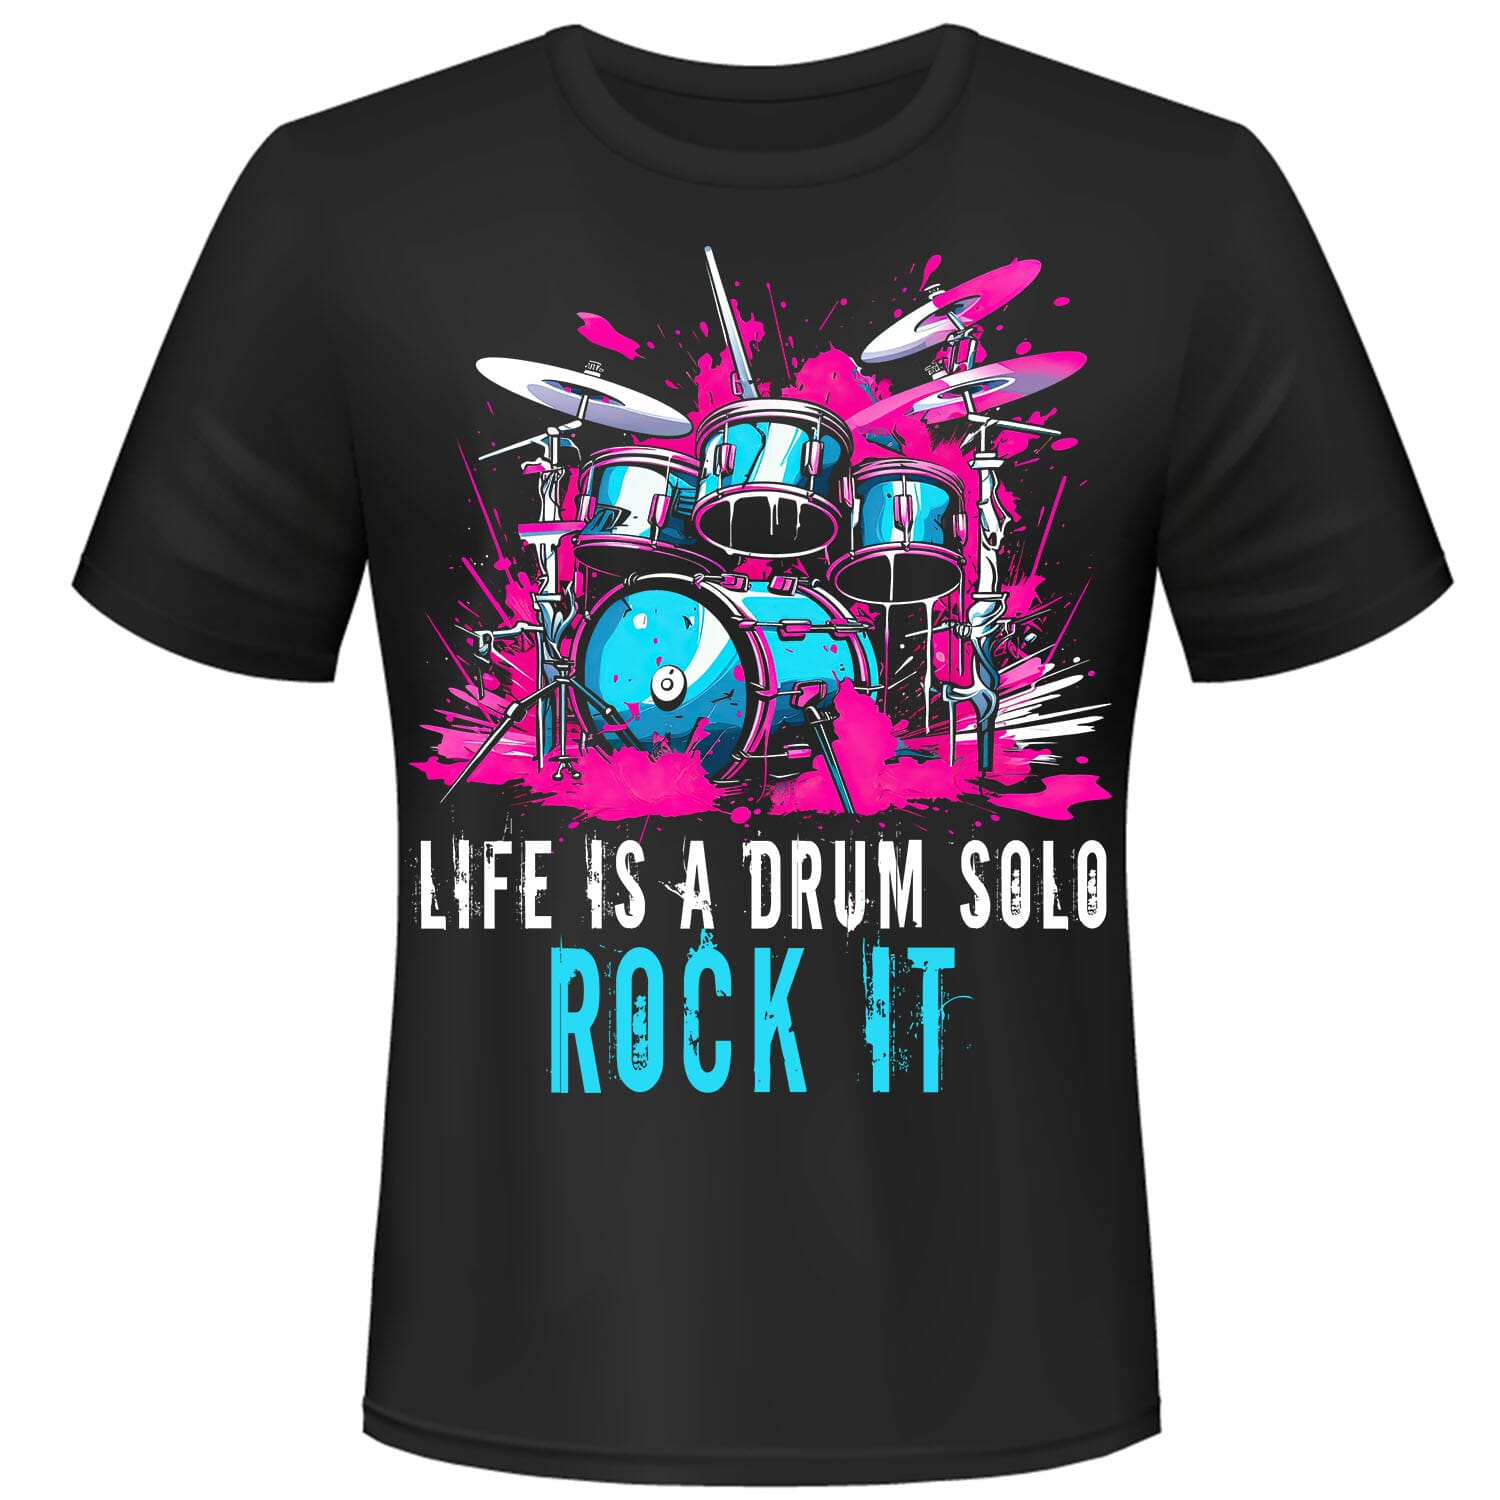 musical drums - life is a drum solo rock it tshirt design